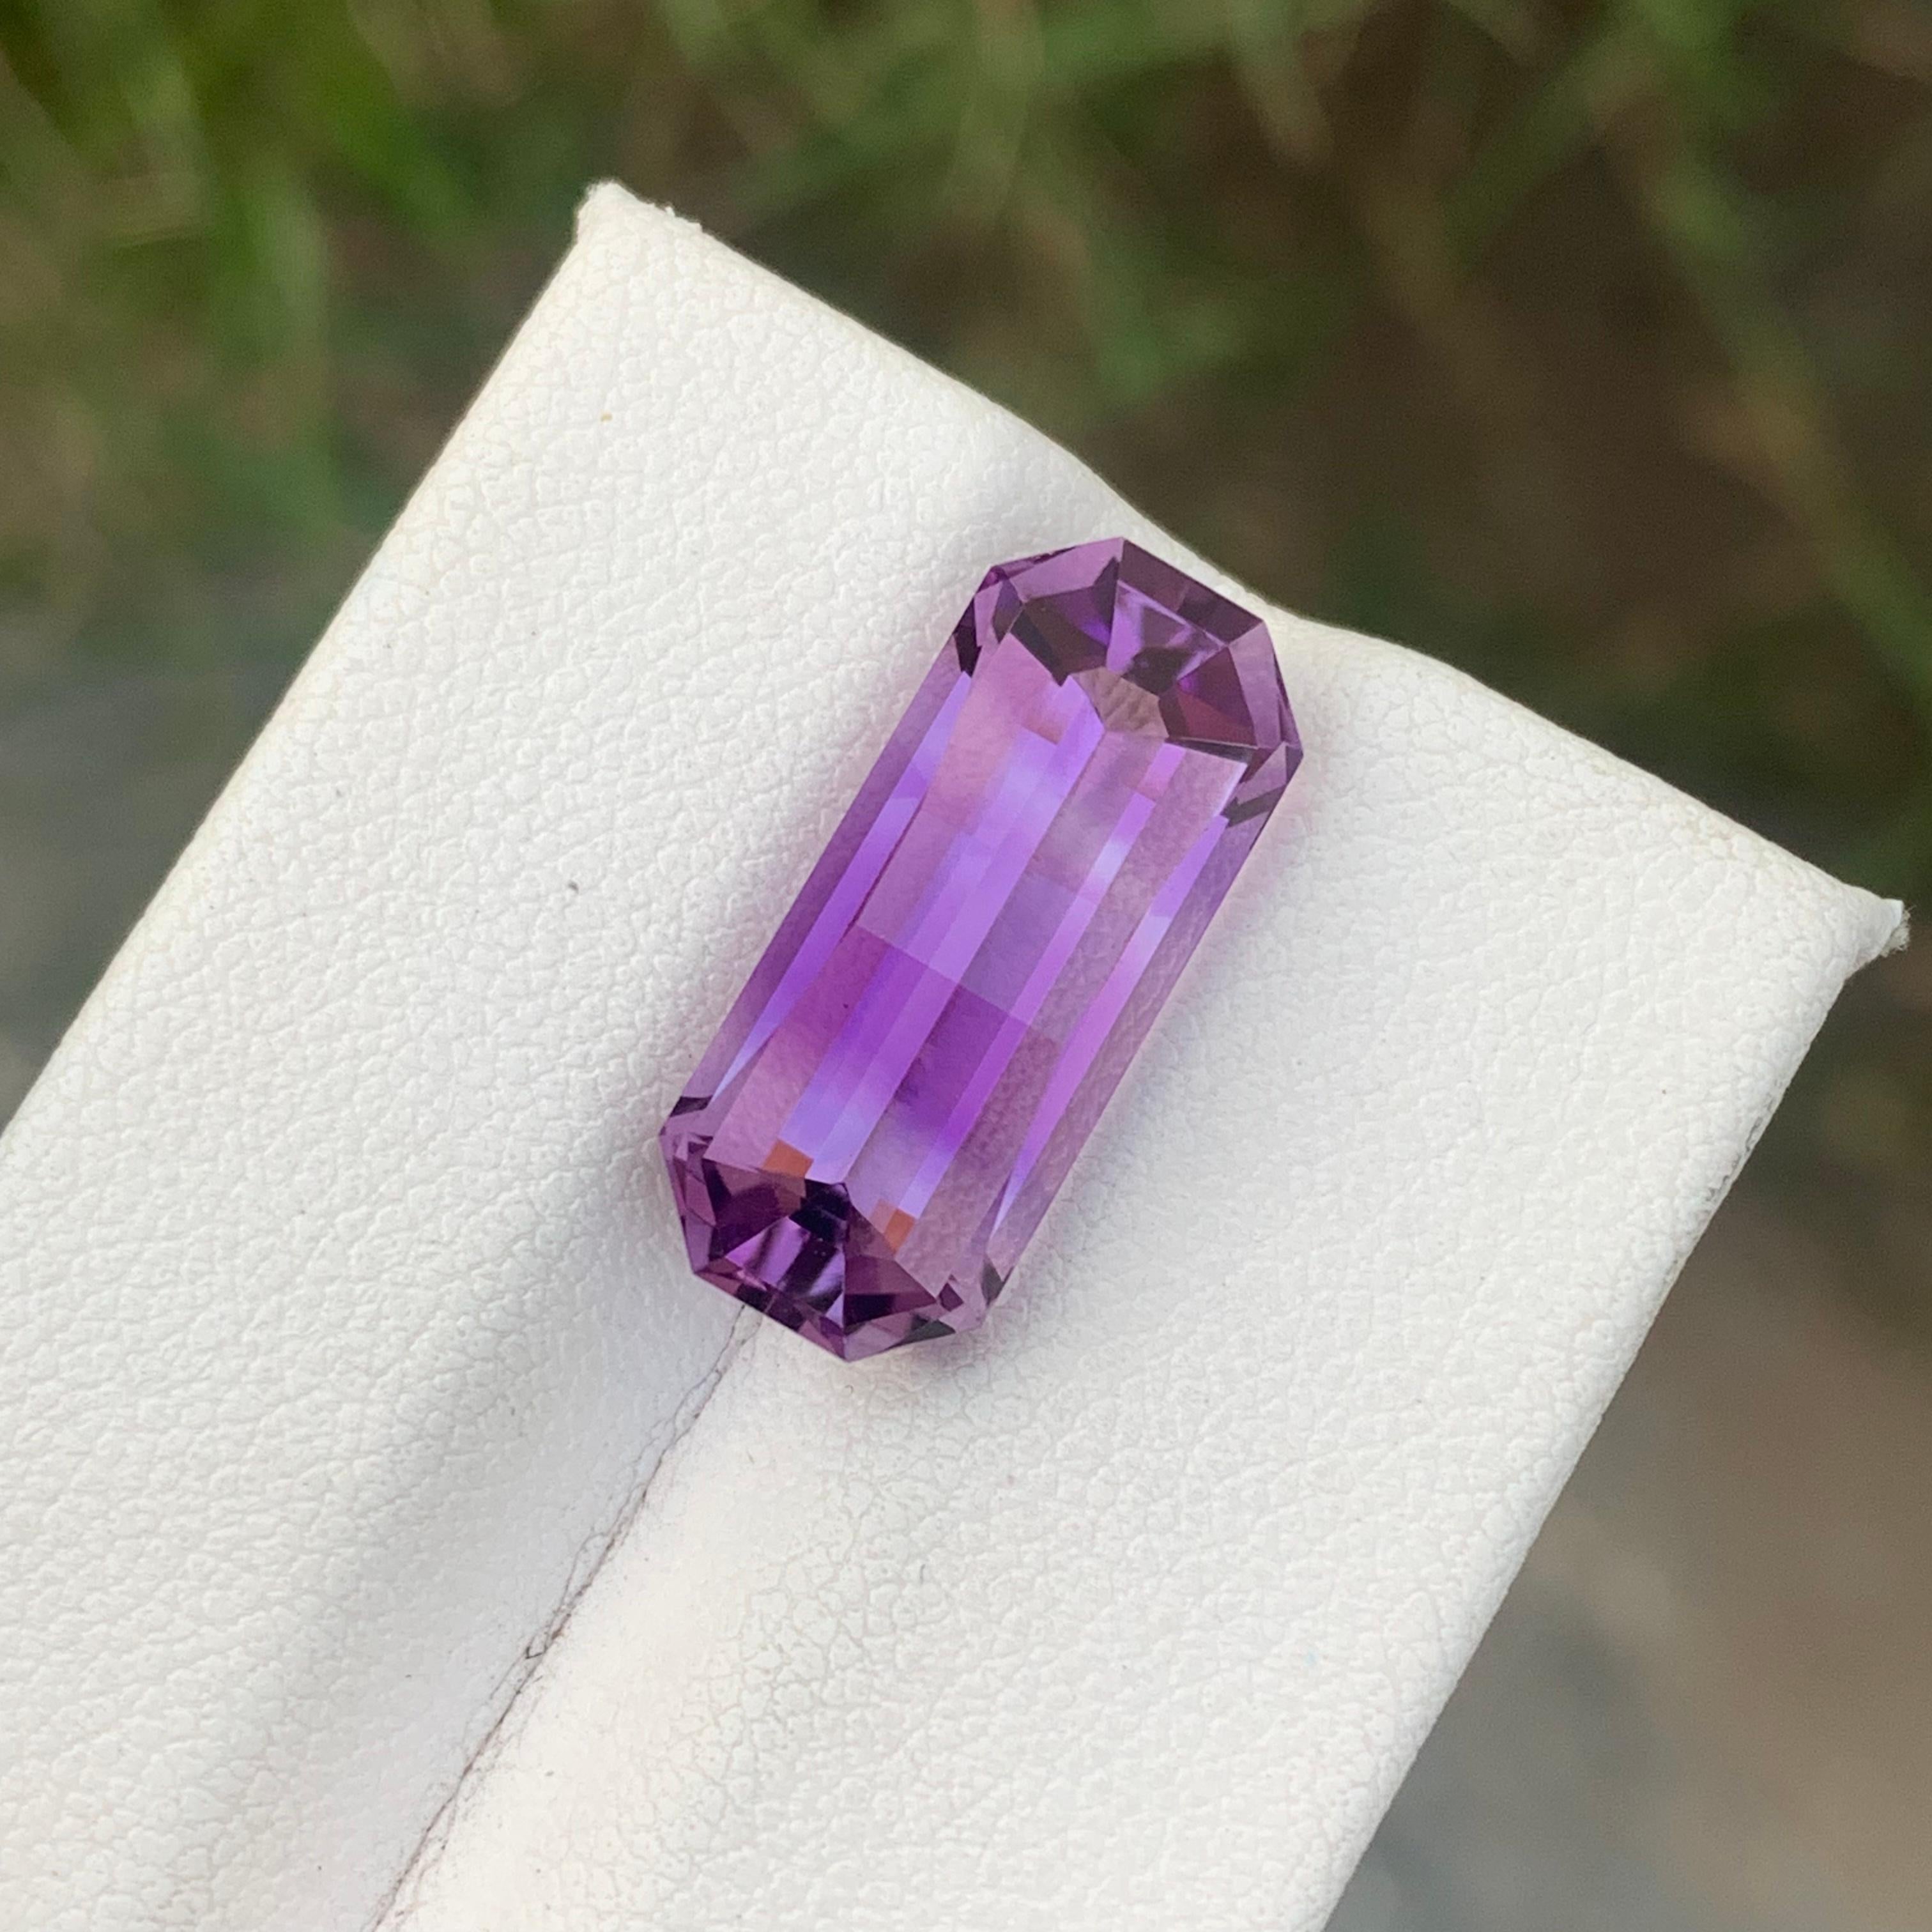 8.25cts Natural Loose Amethyst Gemstone Pixel Pixelated Cut From Brazil Mine For Sale 1